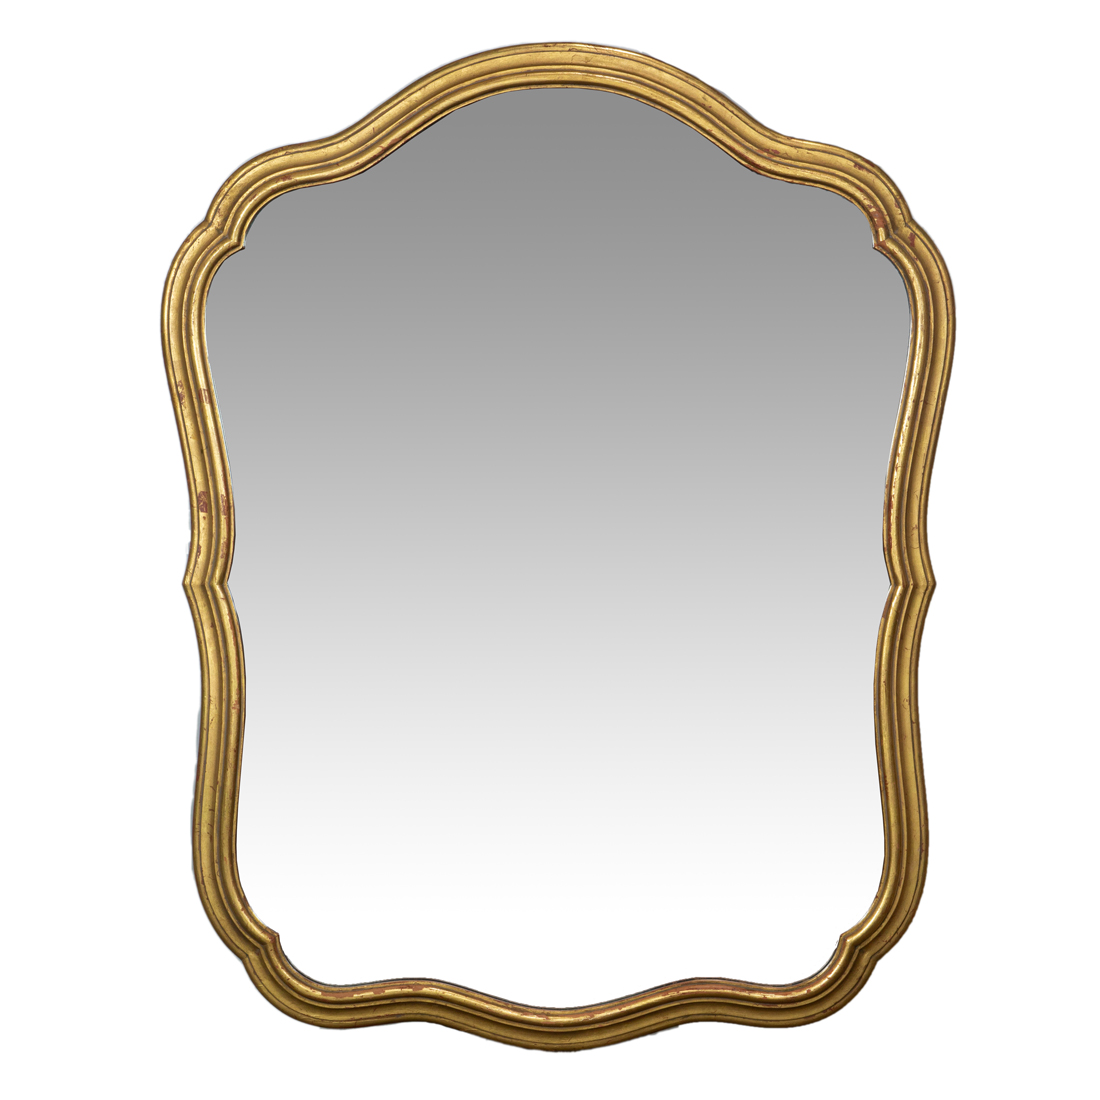 A GILTWOOD SHIELD FORM LOOKING 3a0efe